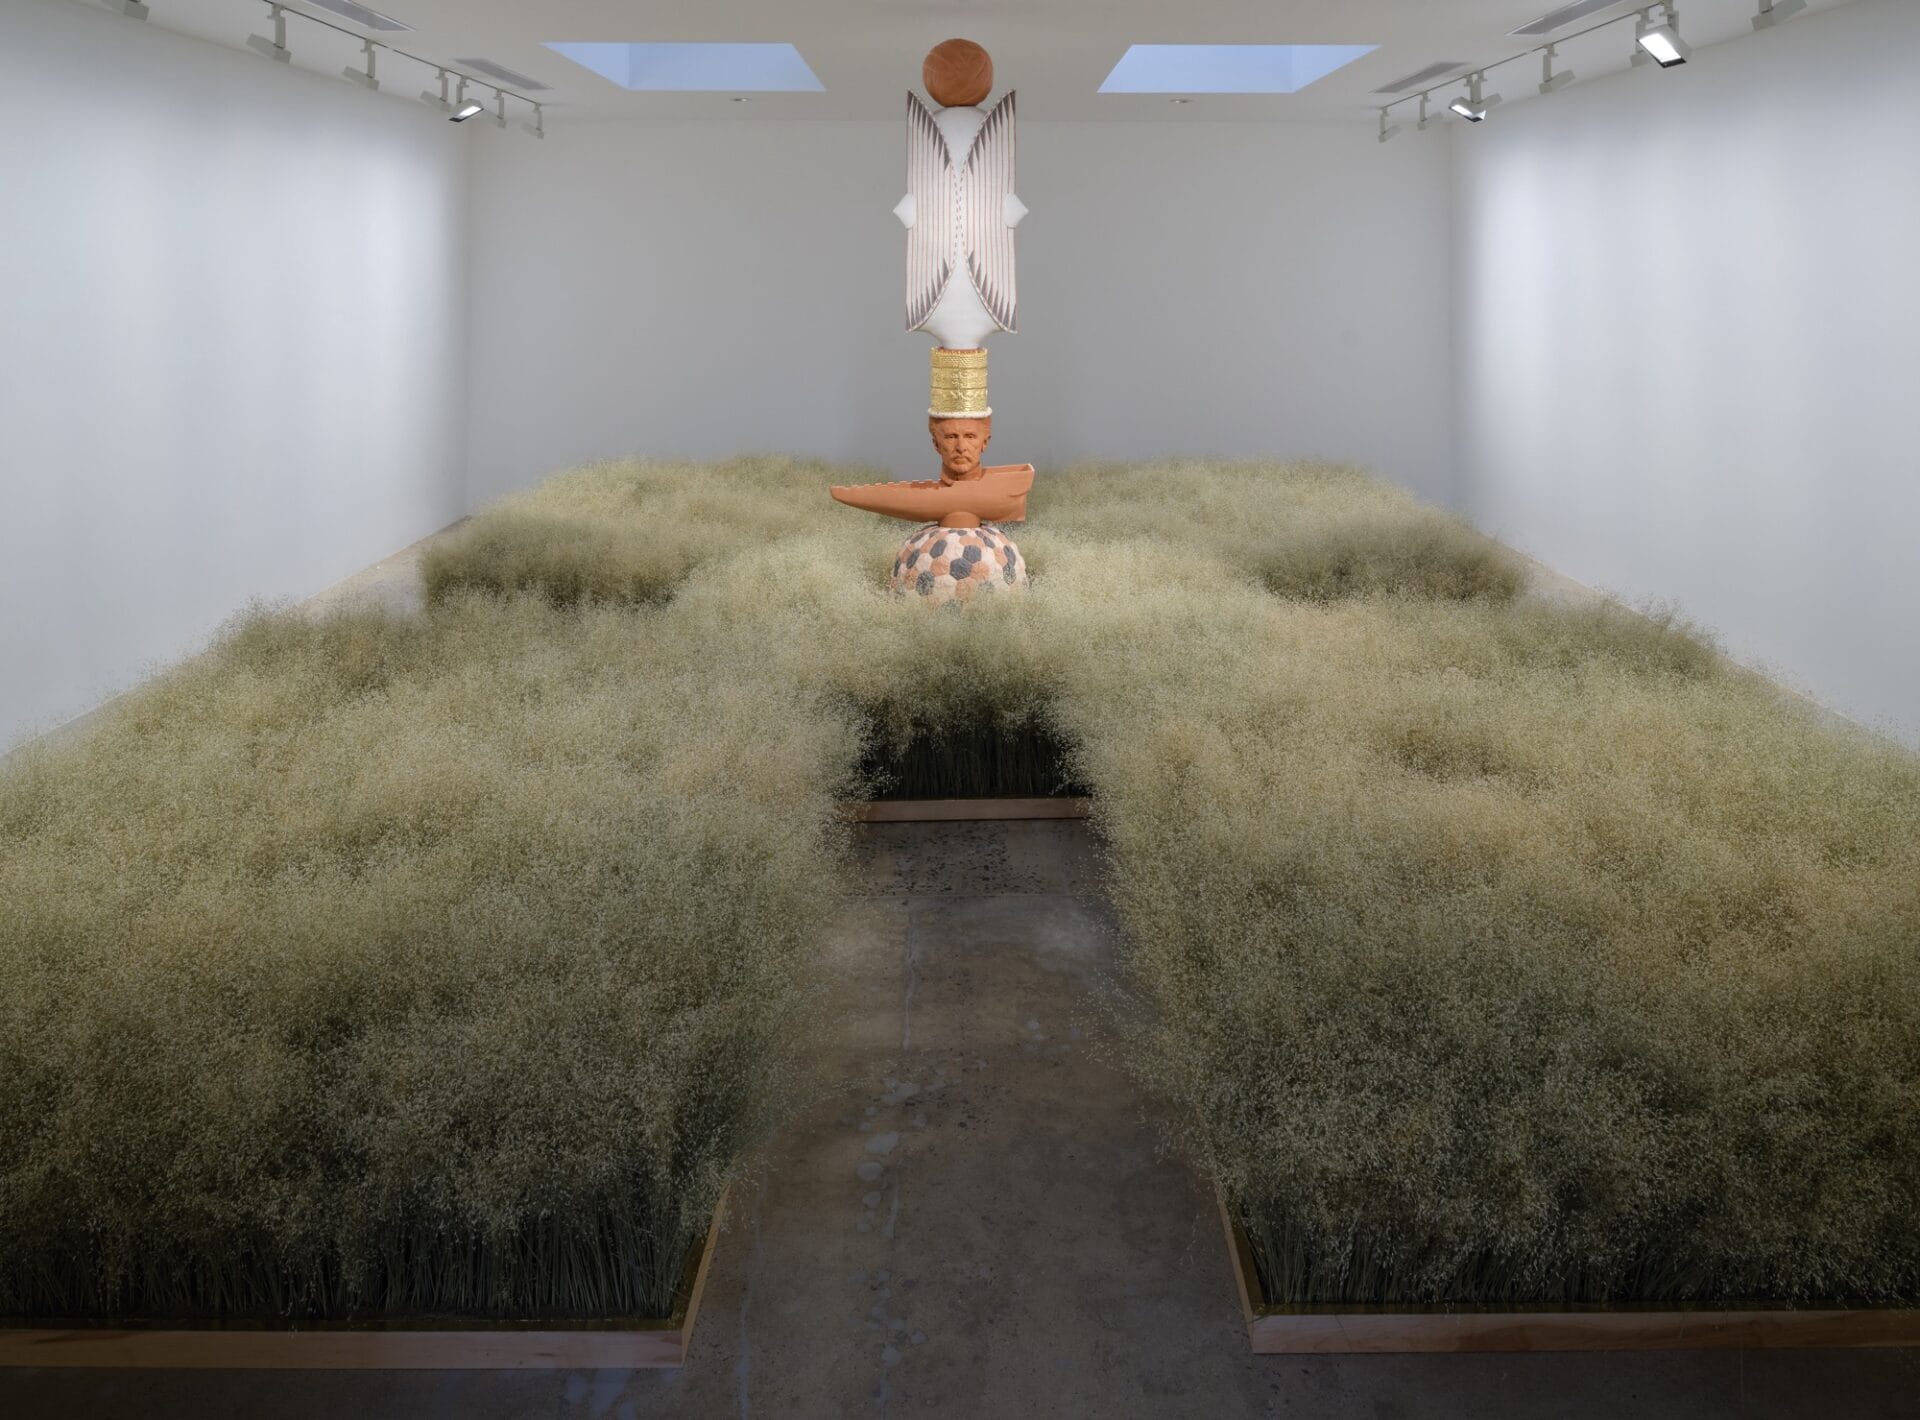 a large-scale installation in a gallery space with a rice field installation that viewers can walk through on a pathway, leading to a single, totem-like sculpture